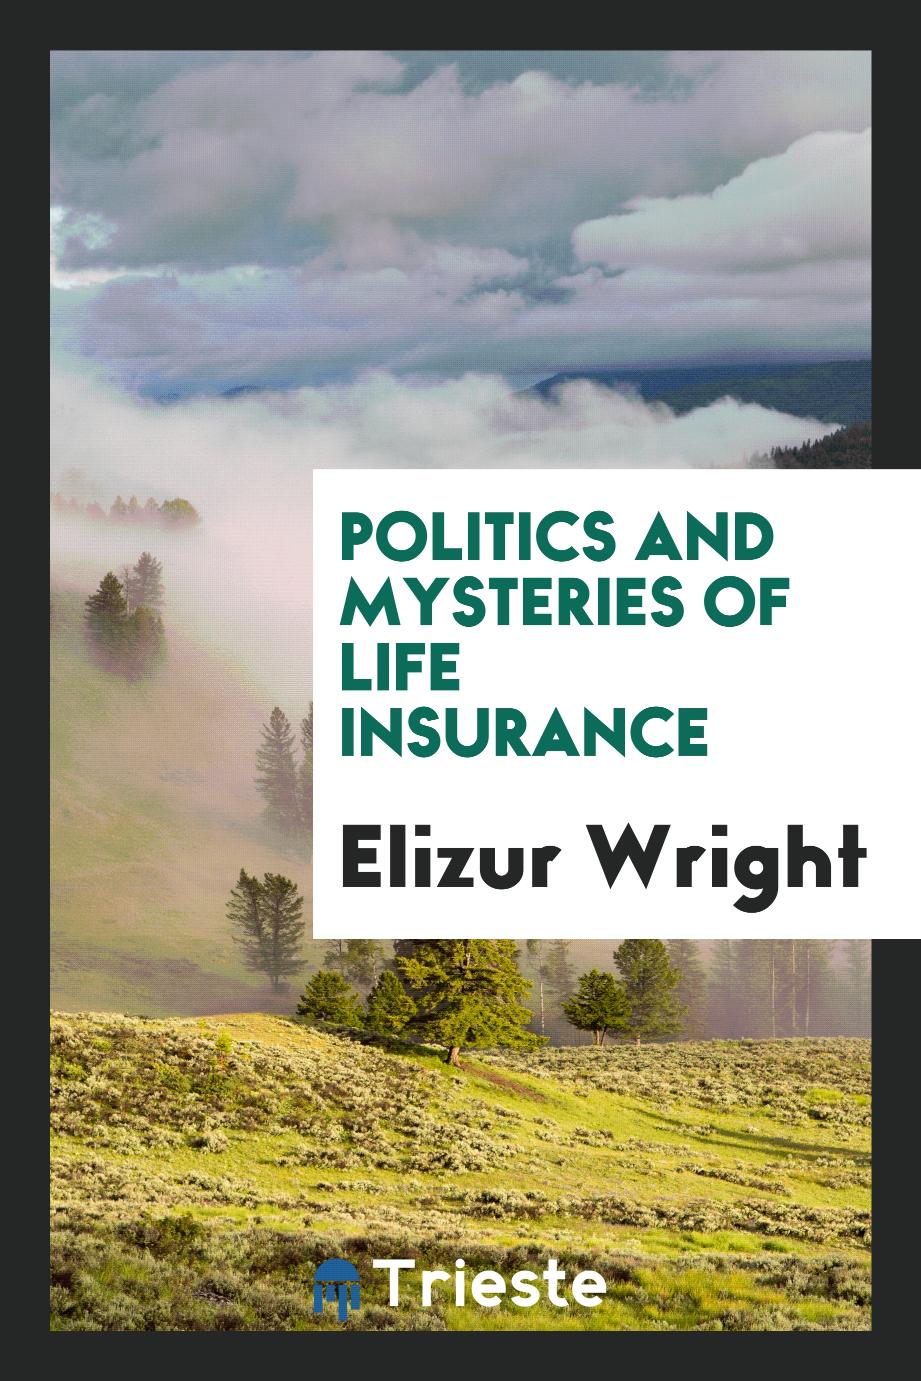 Politics and mysteries of life insurance